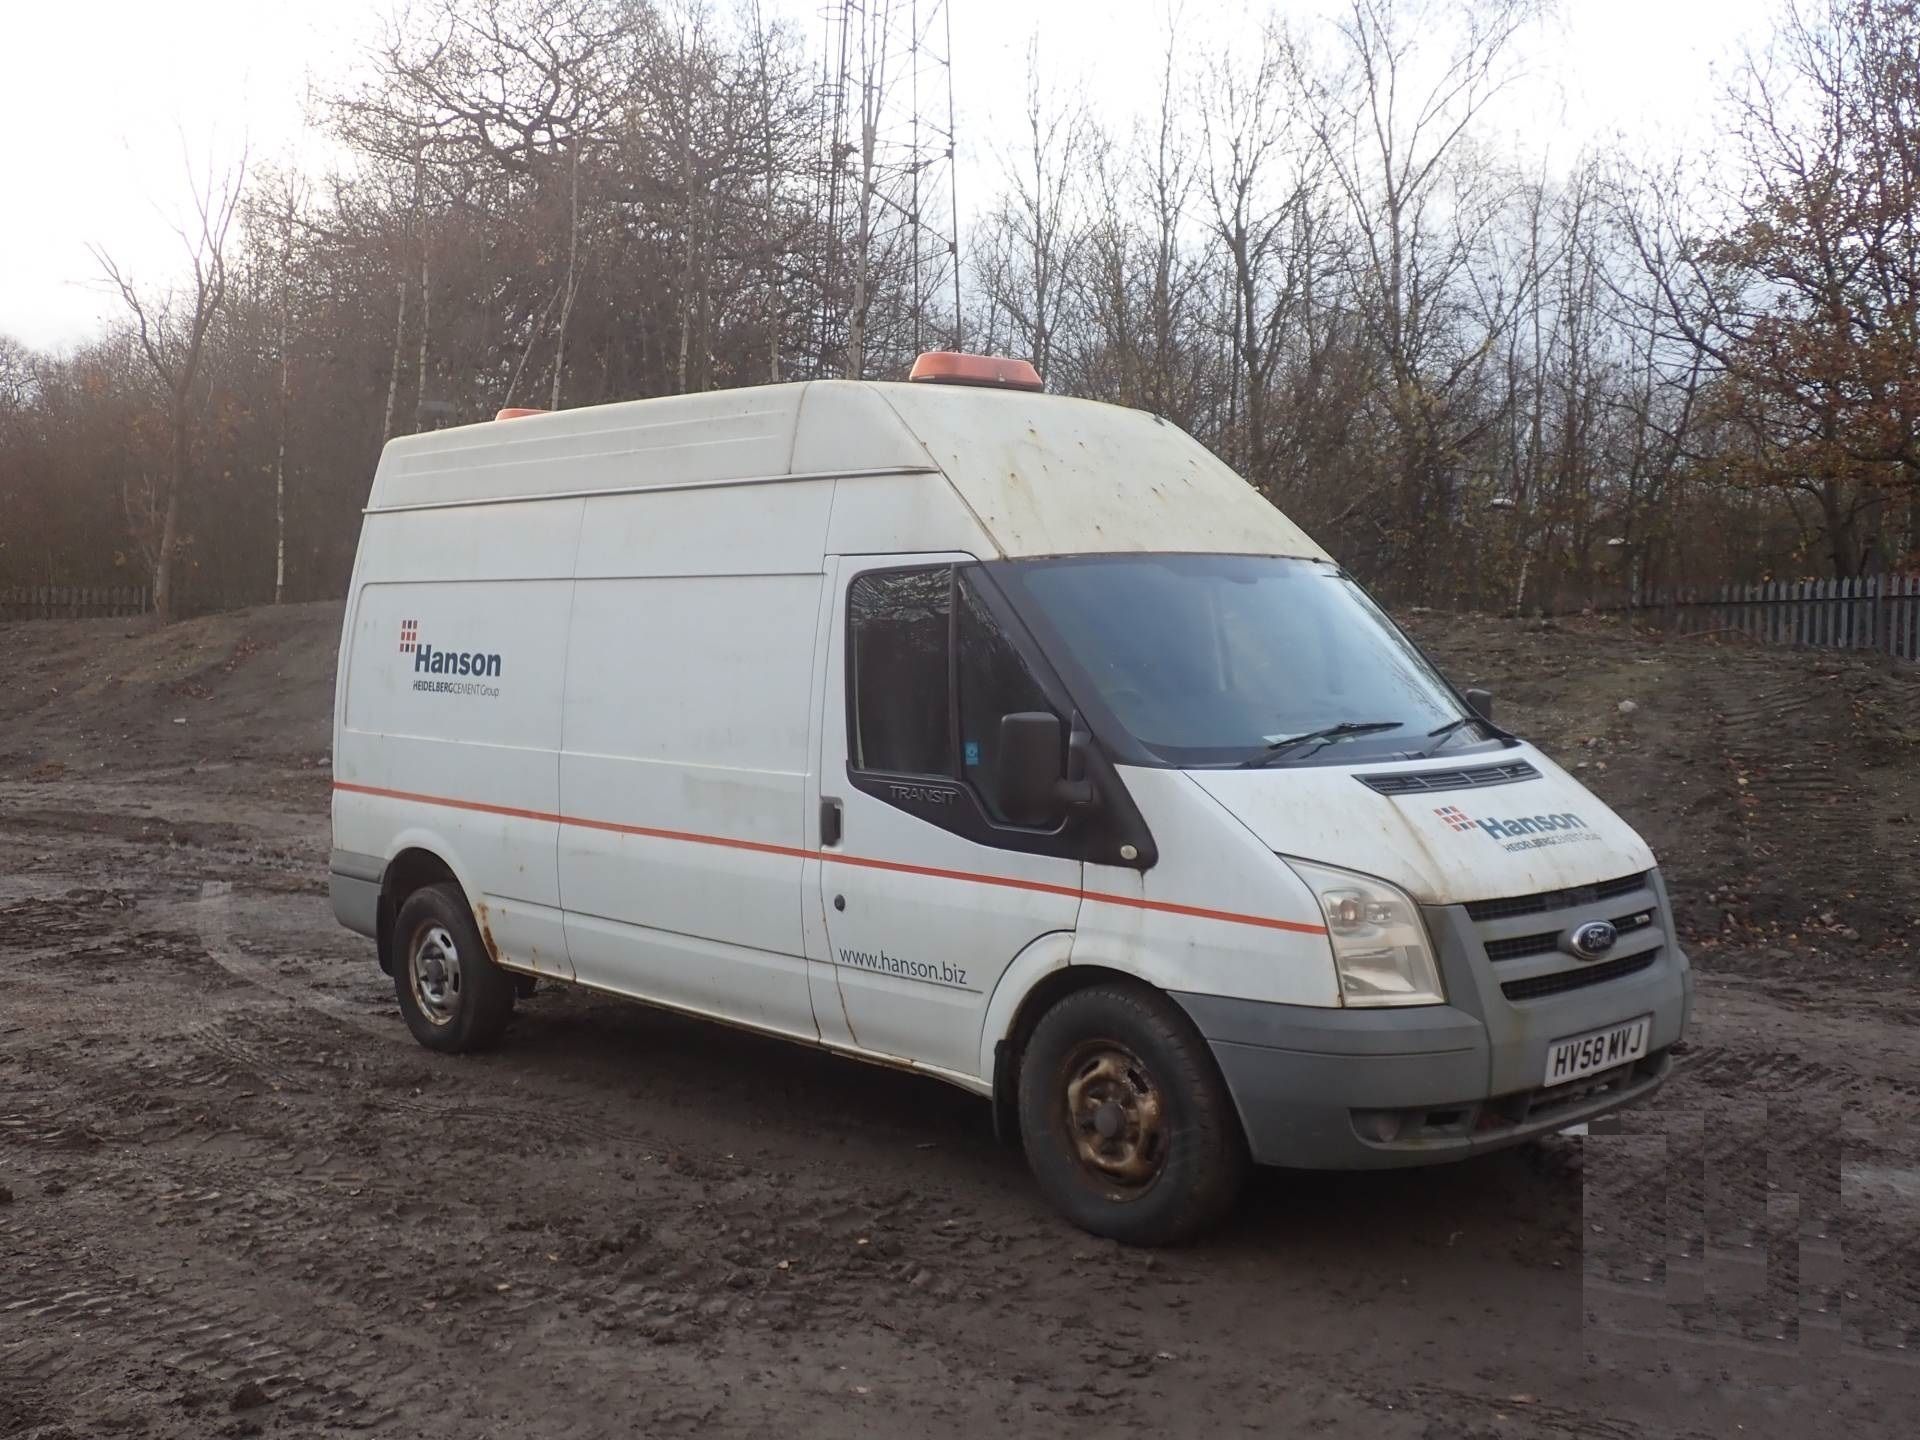 2008 Ford Transit 350 LWB 115 RWD 5 Door Panel Van - CL505 - Location: Corby, Northamptonshire - Image 8 of 12